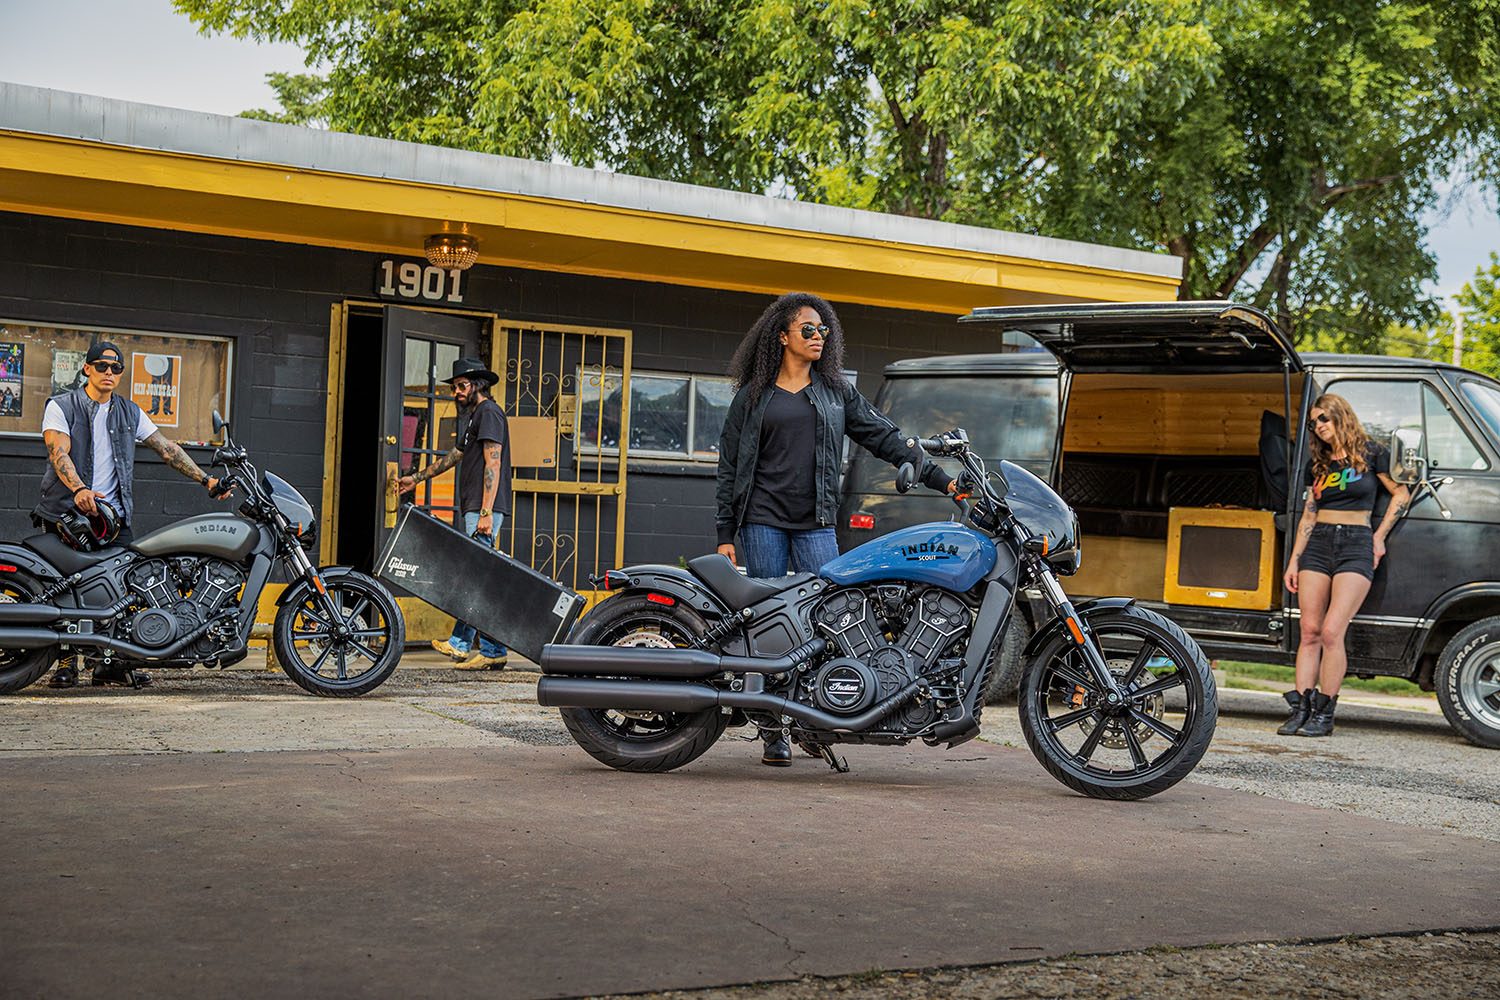 2022 Indian Scout® Rogue ABS in Mineola, New York - Photo 11